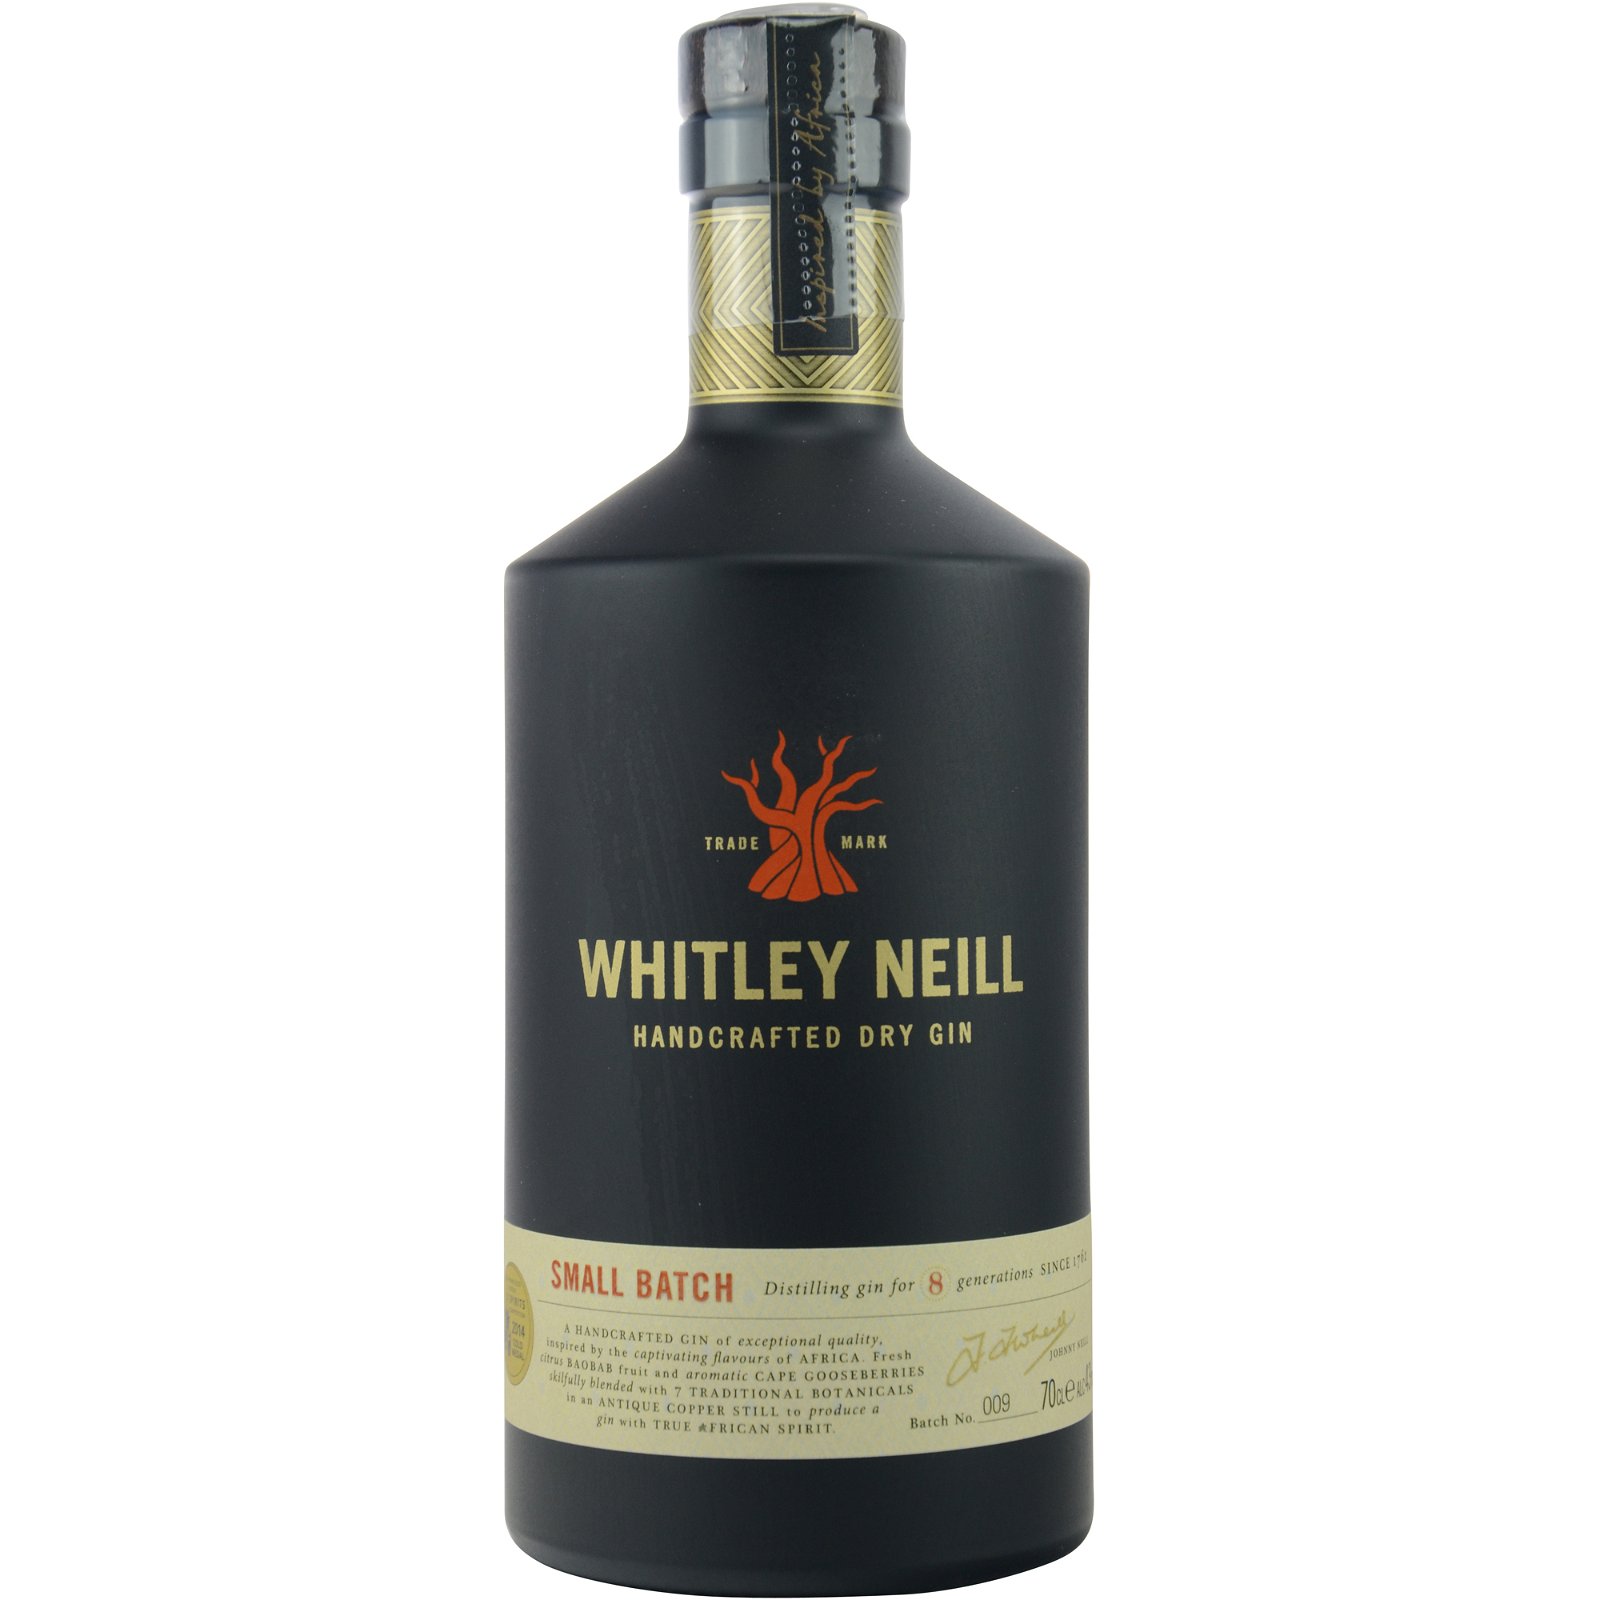 Whitley Neill Handcrafted London Dry Gin